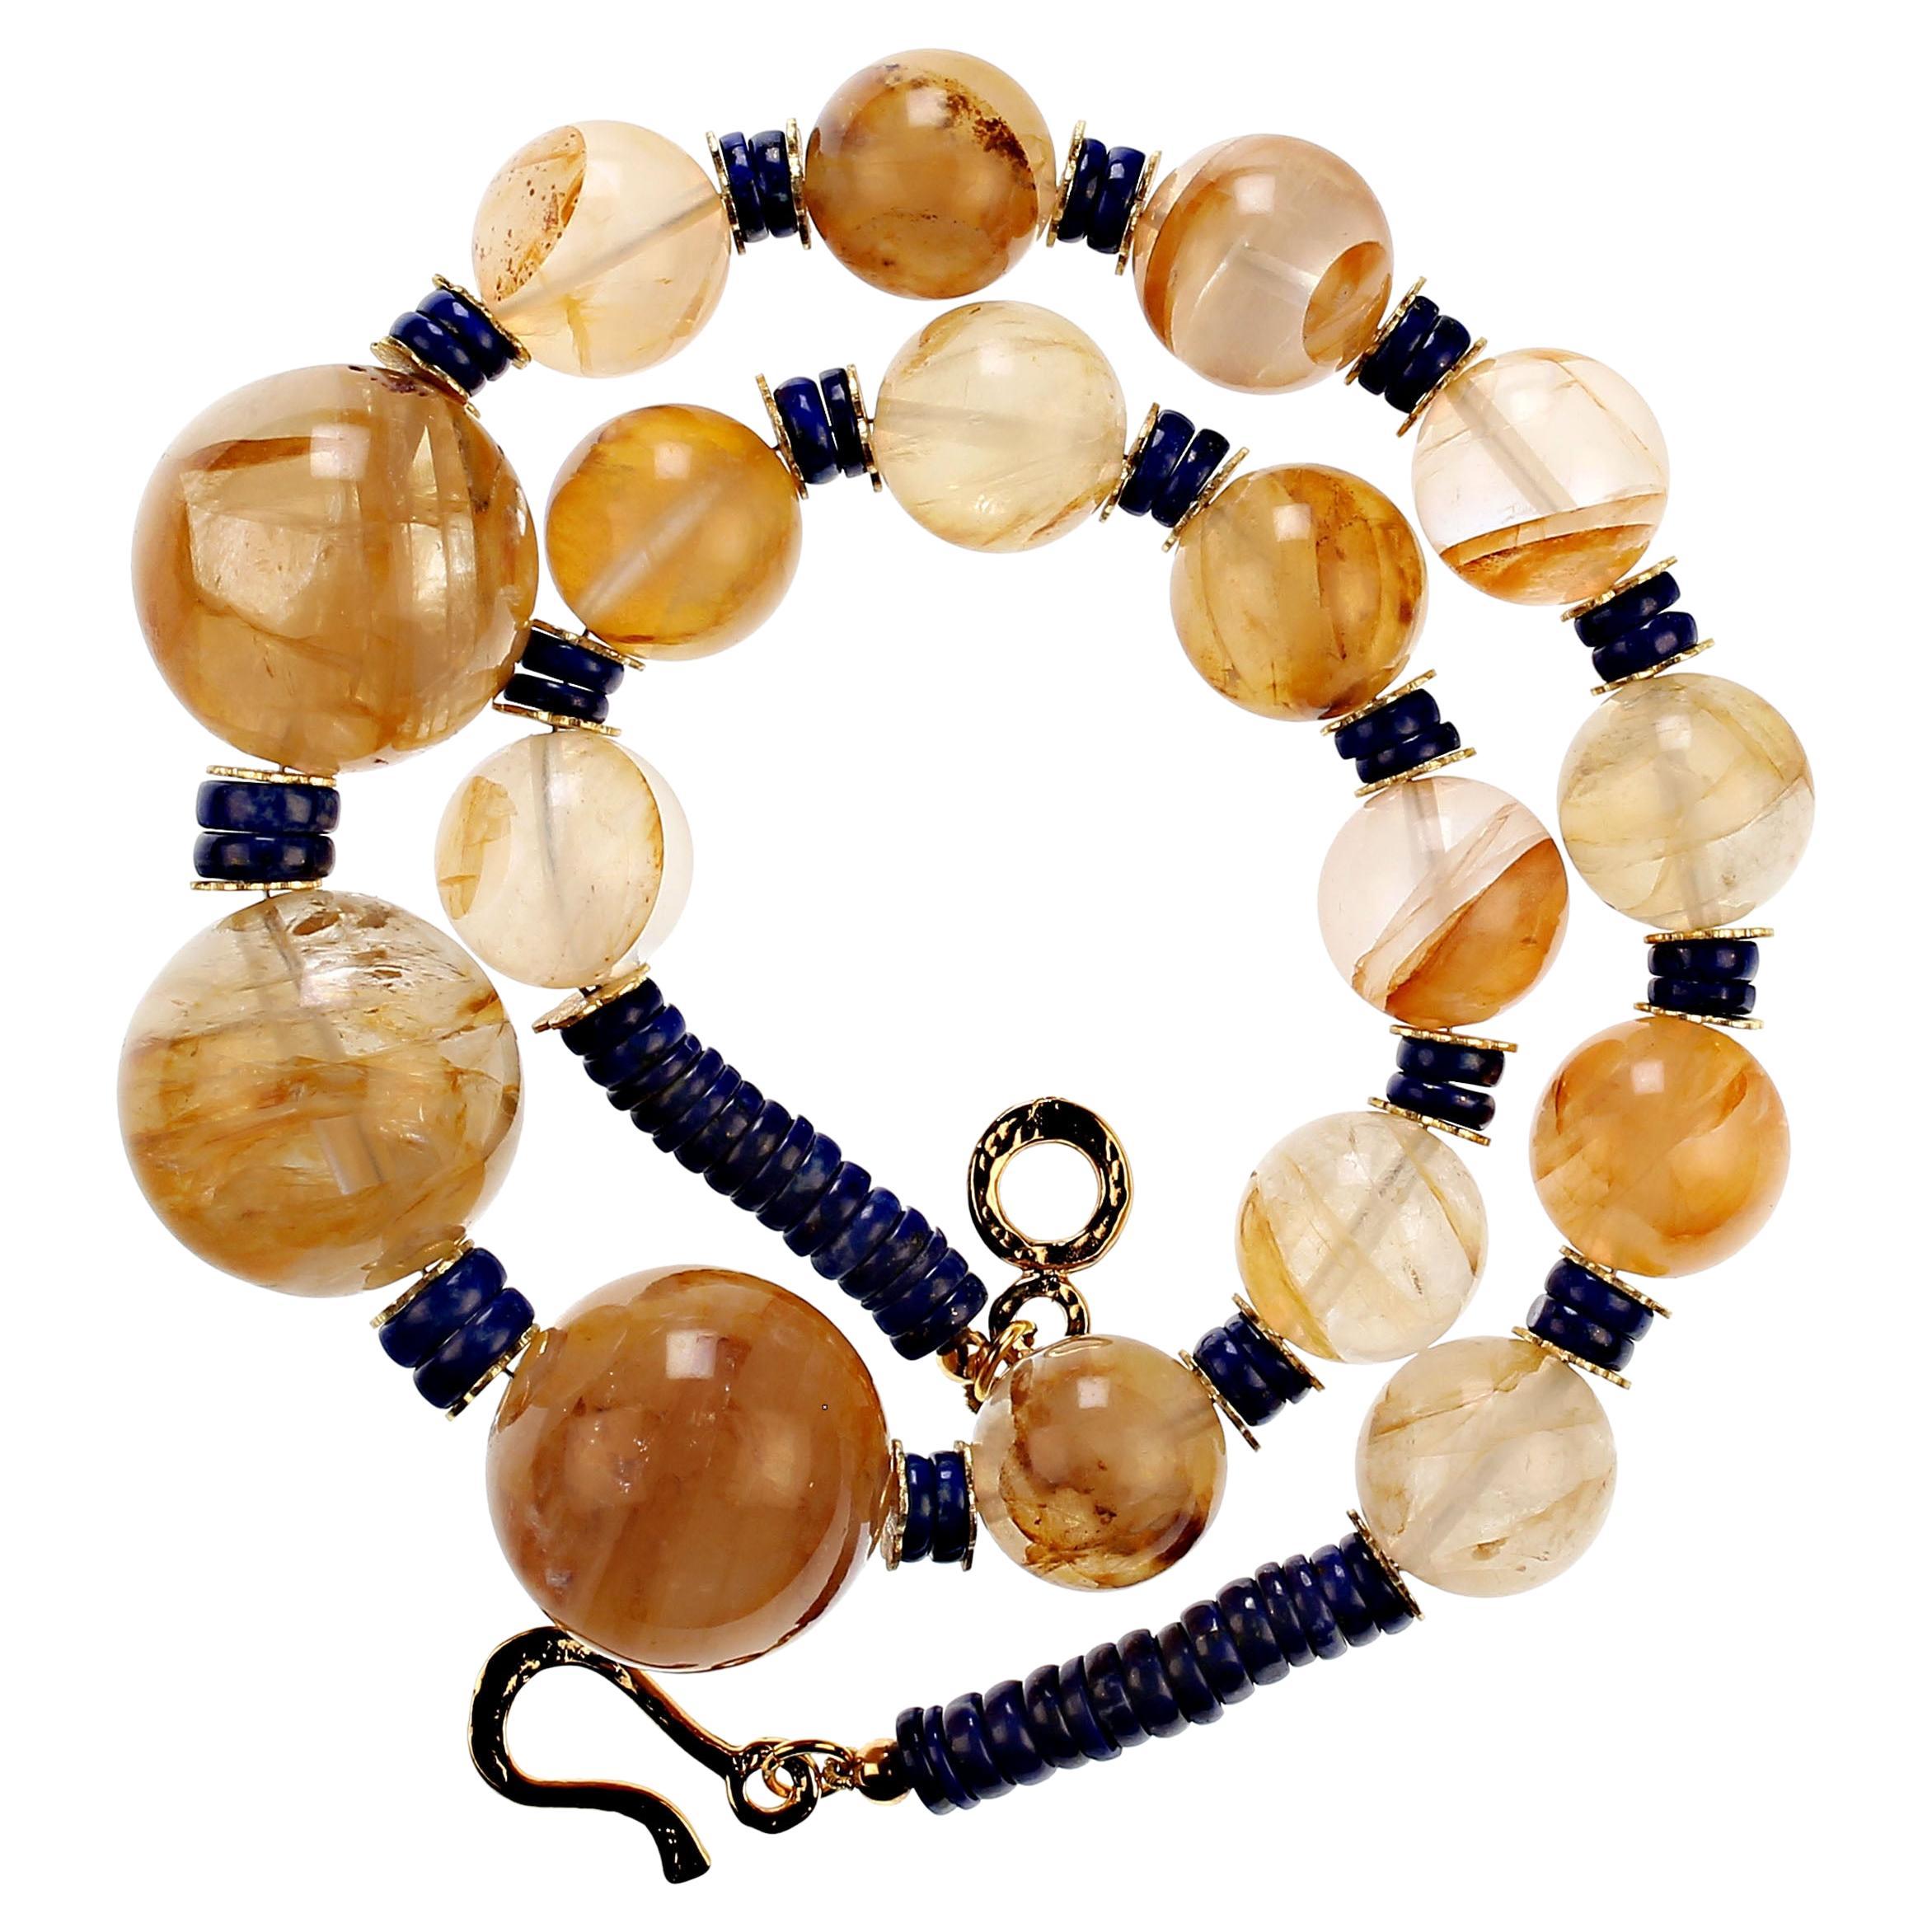 AJD 20 Inch  Golden Quartz and Lapis Lazuli Necklace  Great Gift!!